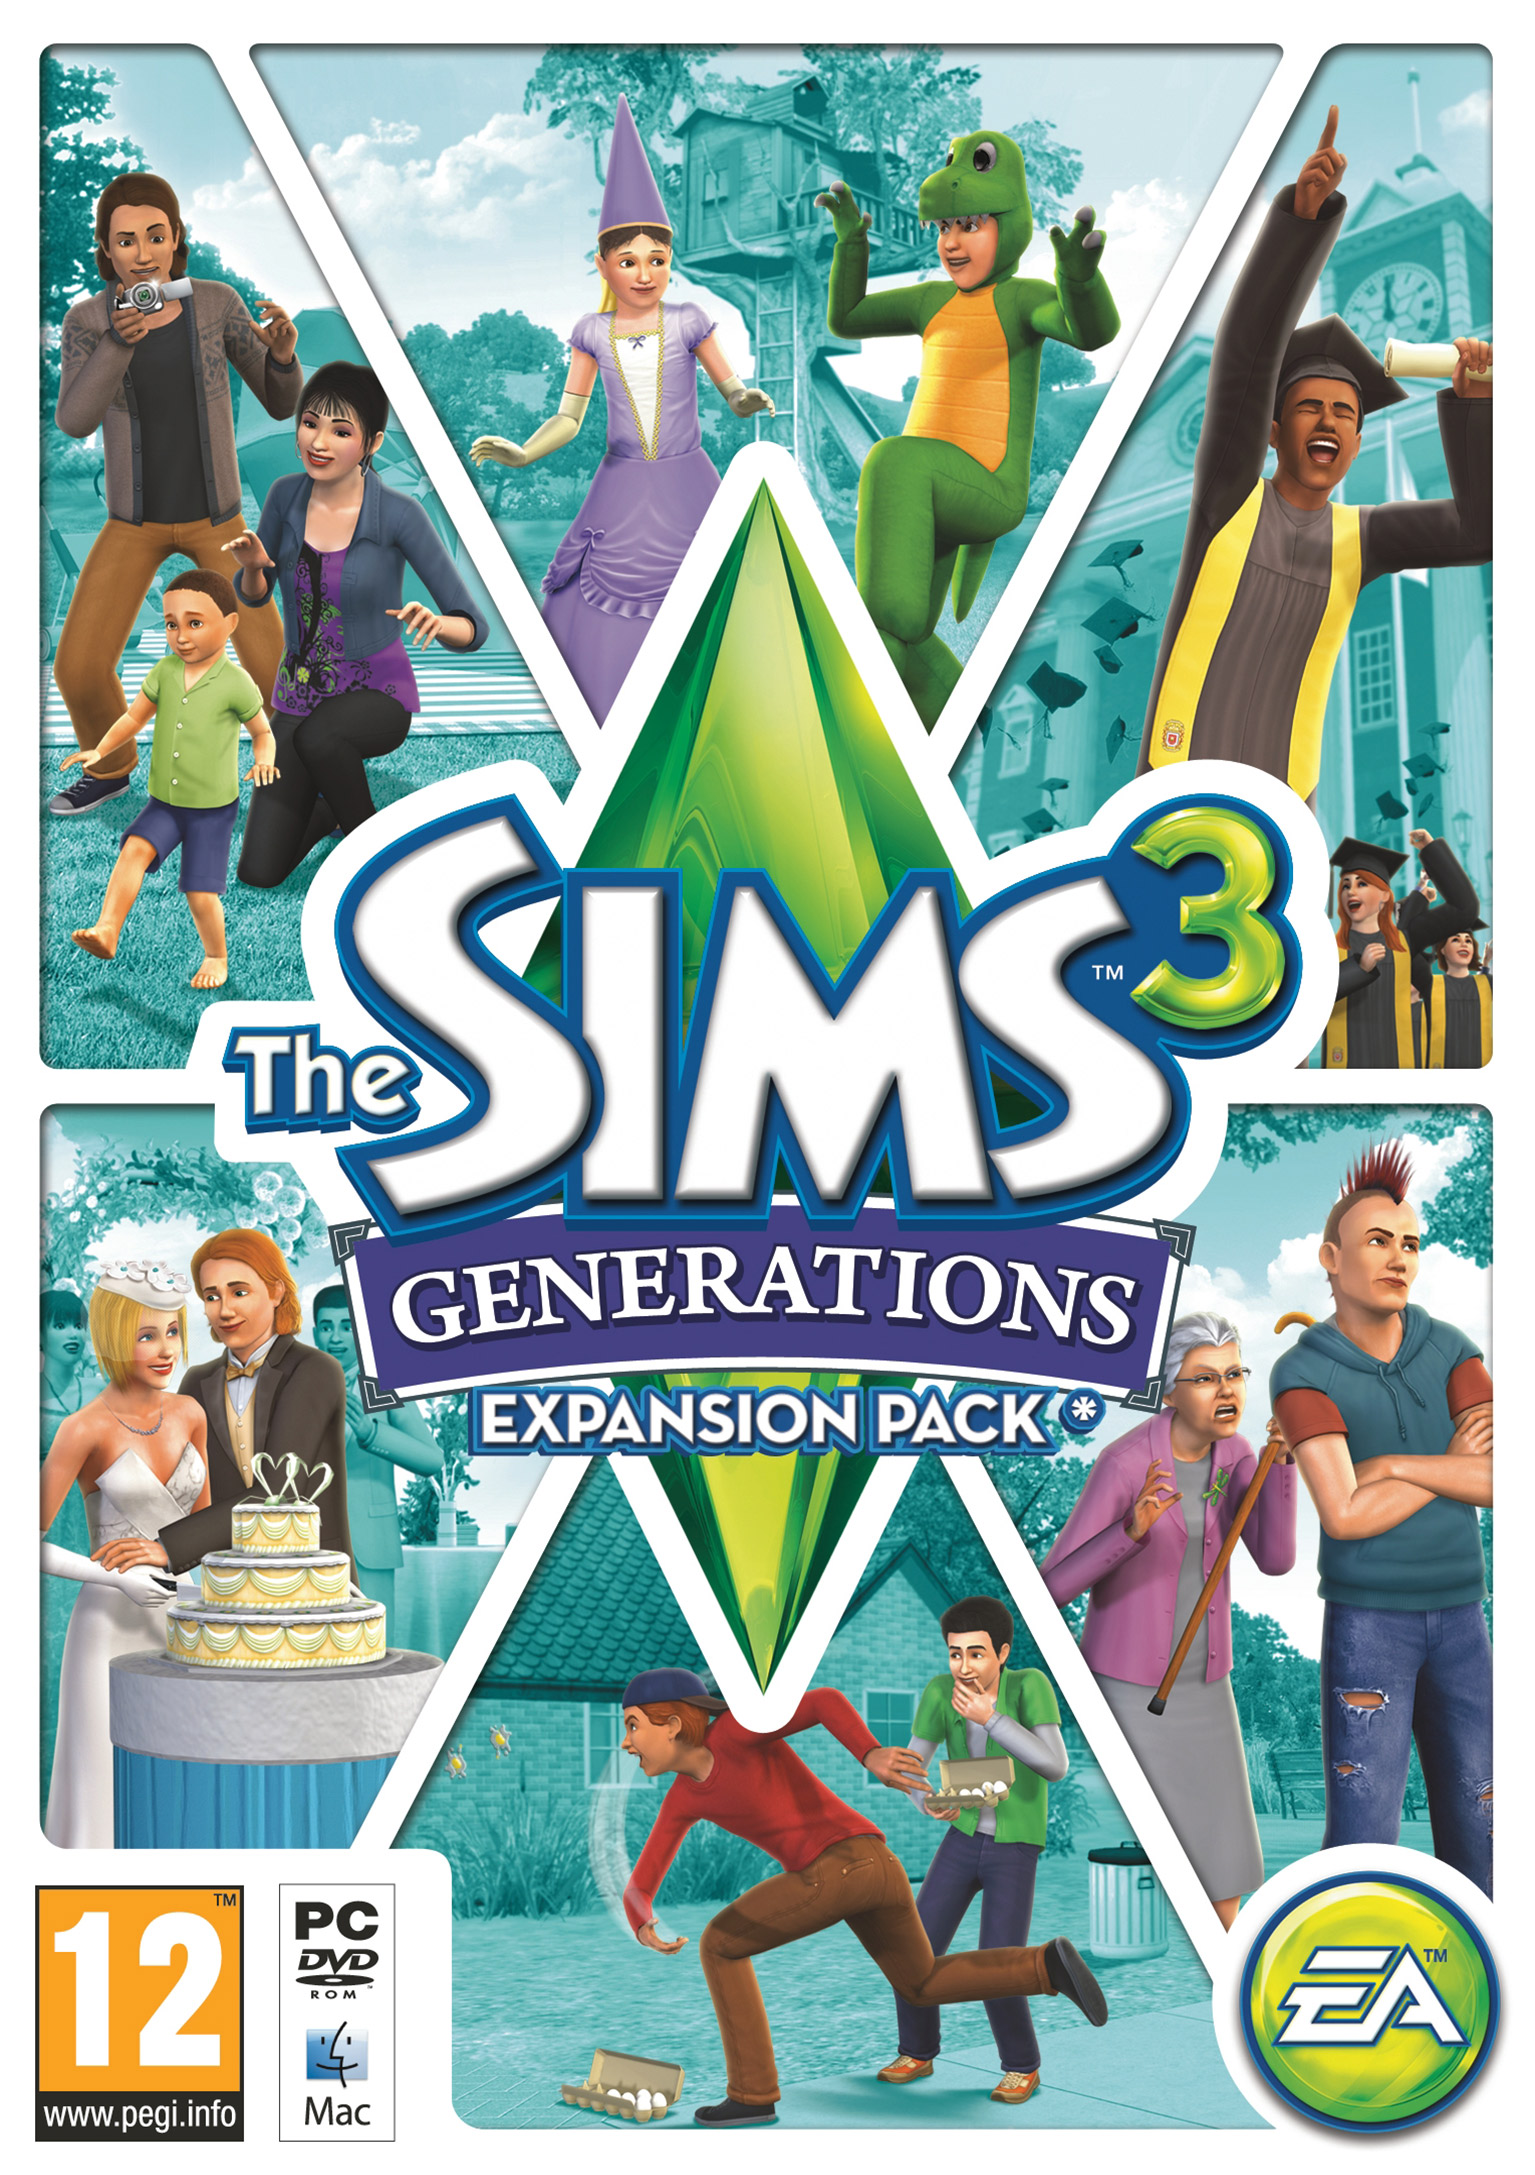 The Sims 3: Generations - predn DVD obal 2